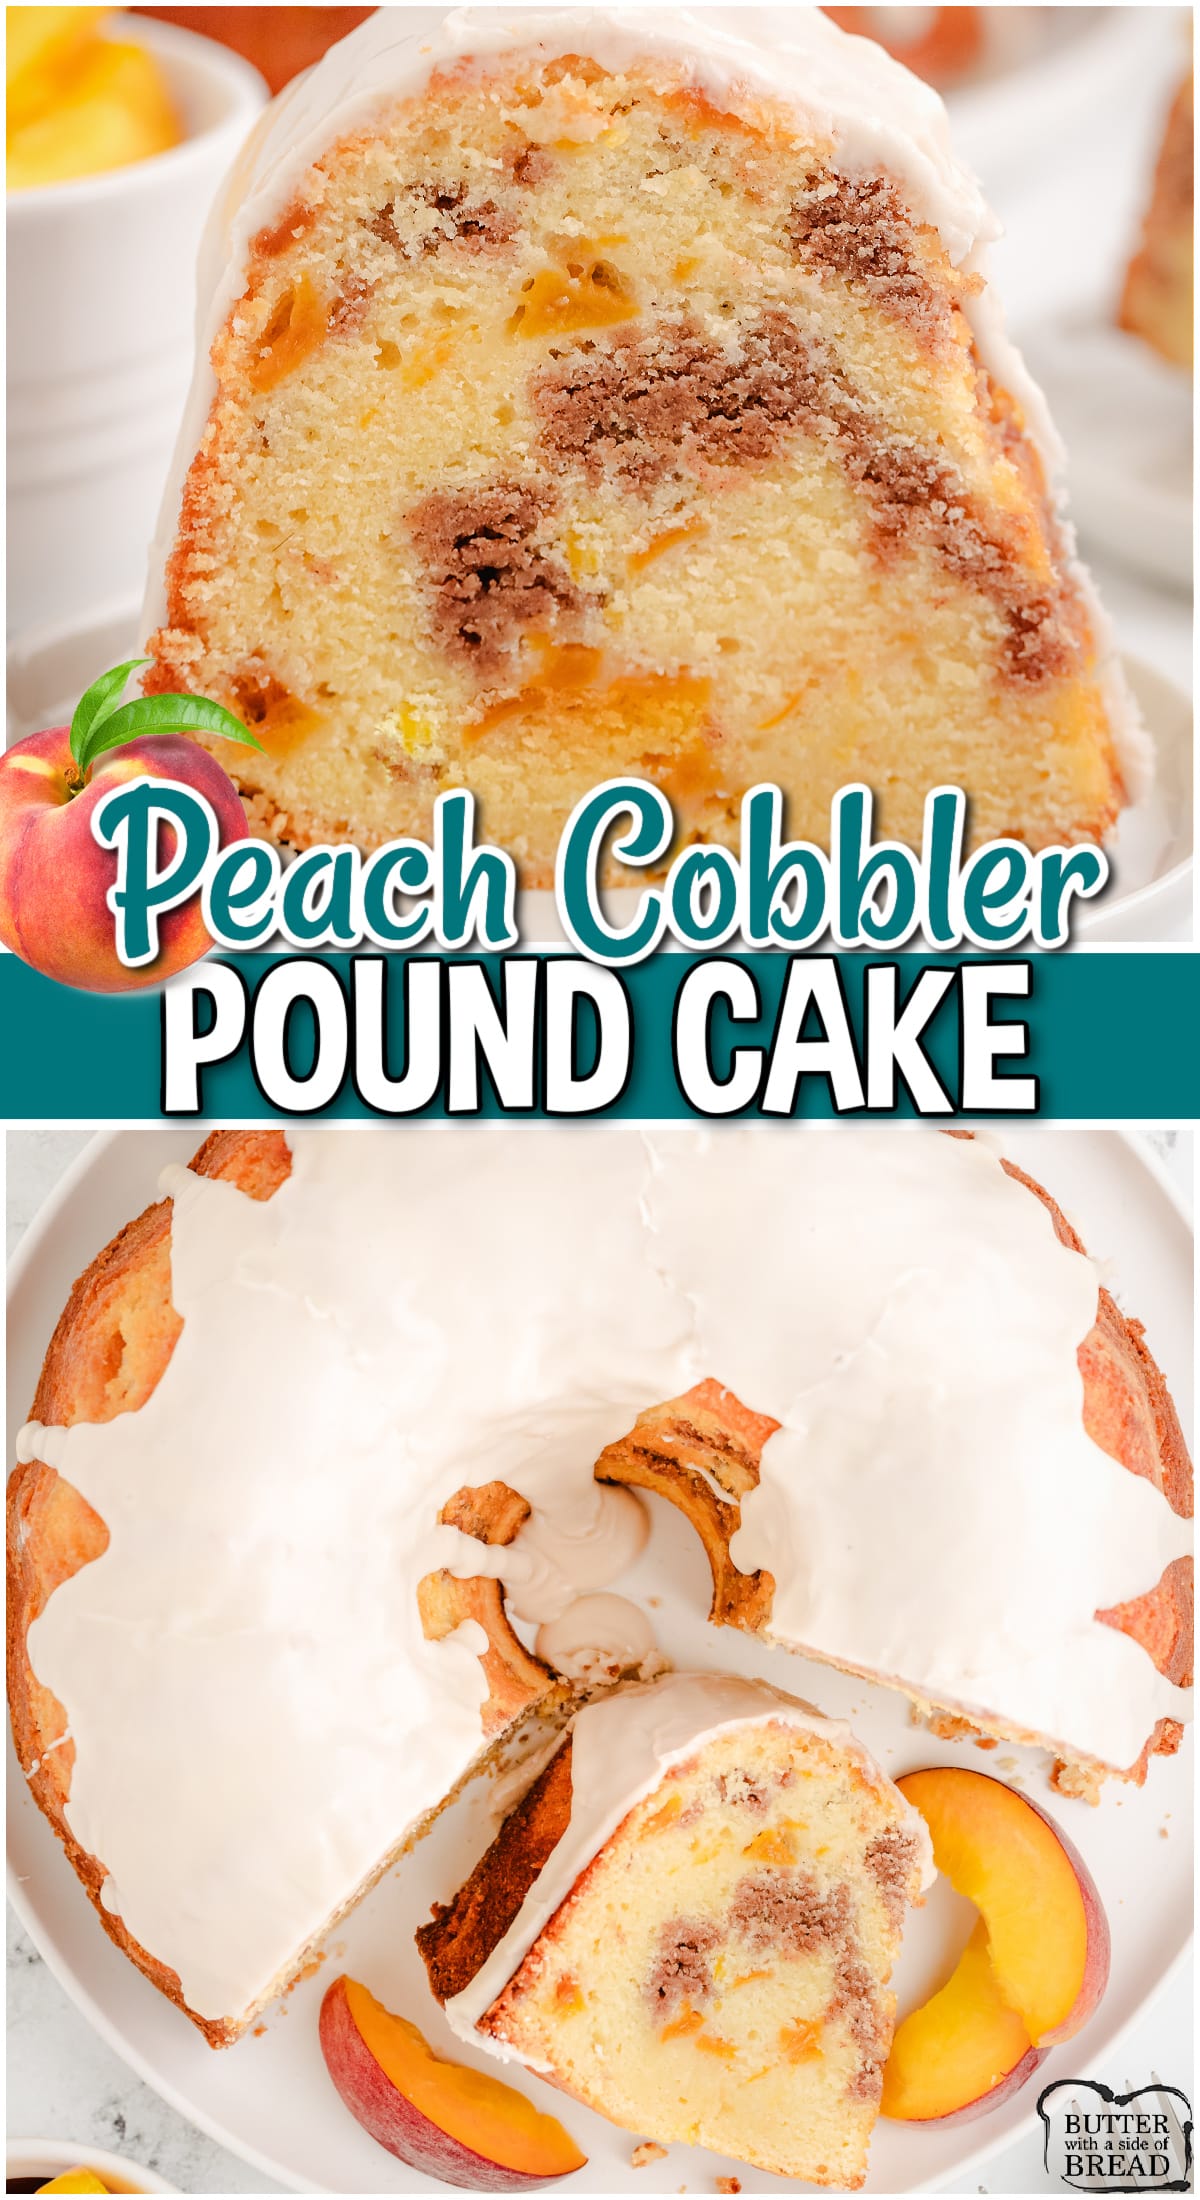 Decadent Peach Cobbler Pound Cake made from scratch and sinfully delicious! Lovely peach flavor in this buttery pound cake baked with layers of cinnamon brown sugar crumble. It's peach cobbler in cake form!